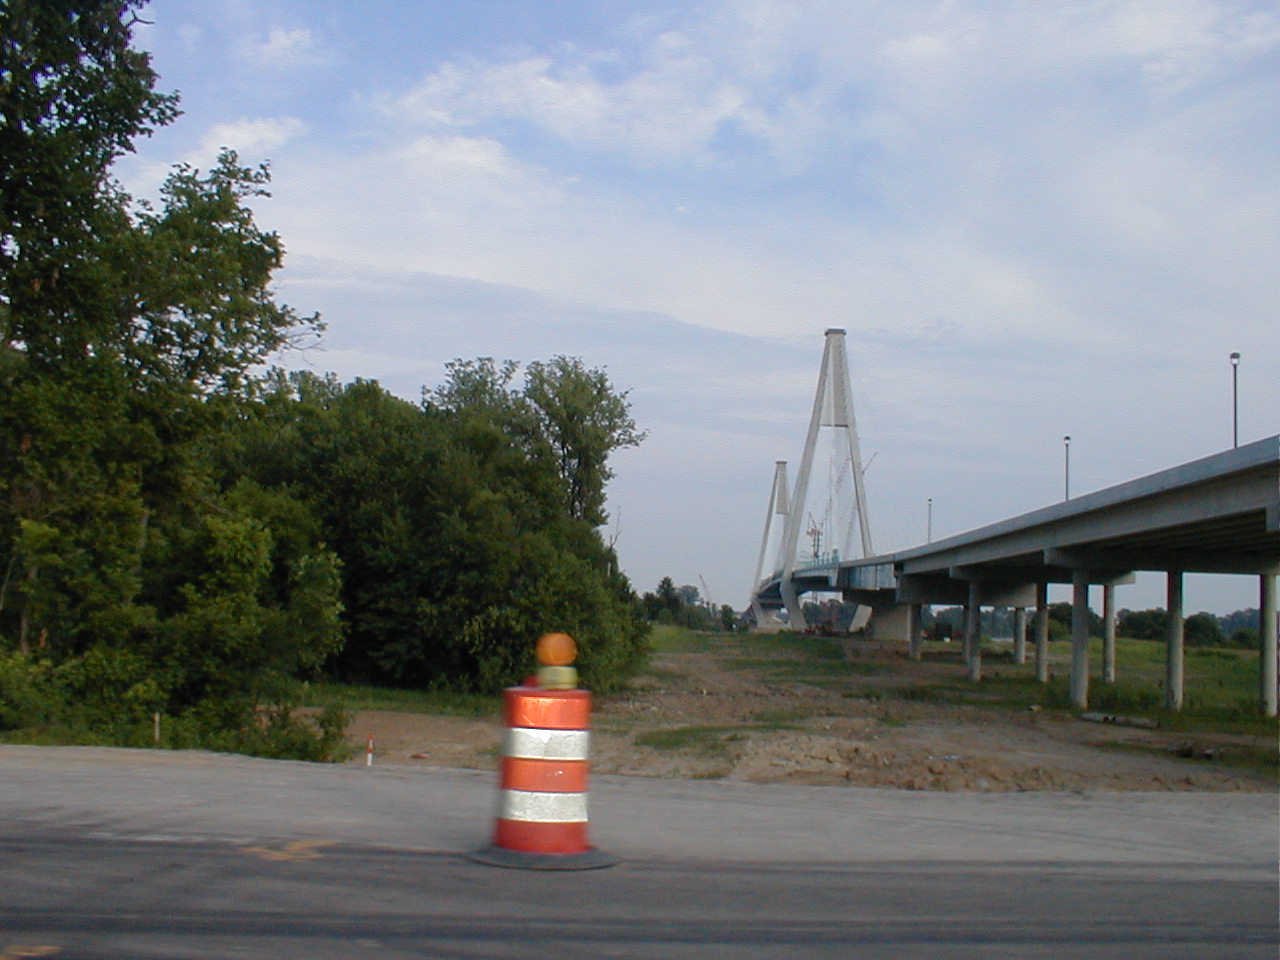 The bridge viewed from Indiana Route 66.